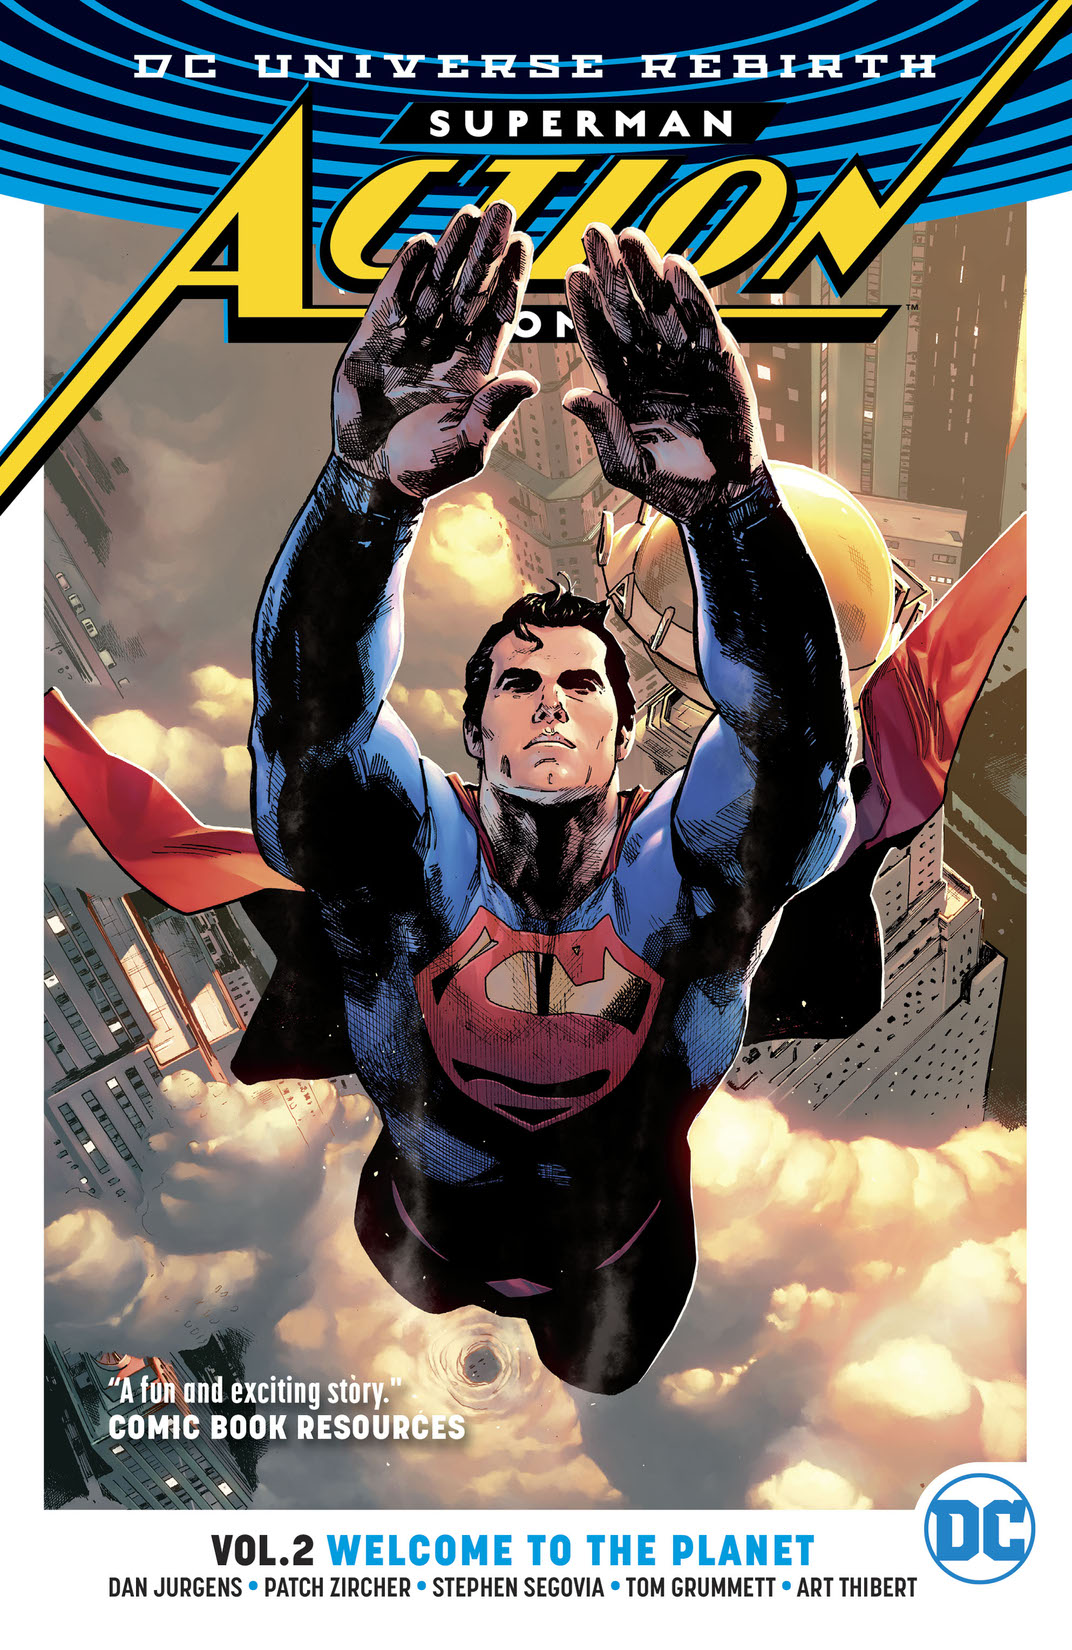 Superman - Action Comics Vol. 2: Welcome to the Planet preview images